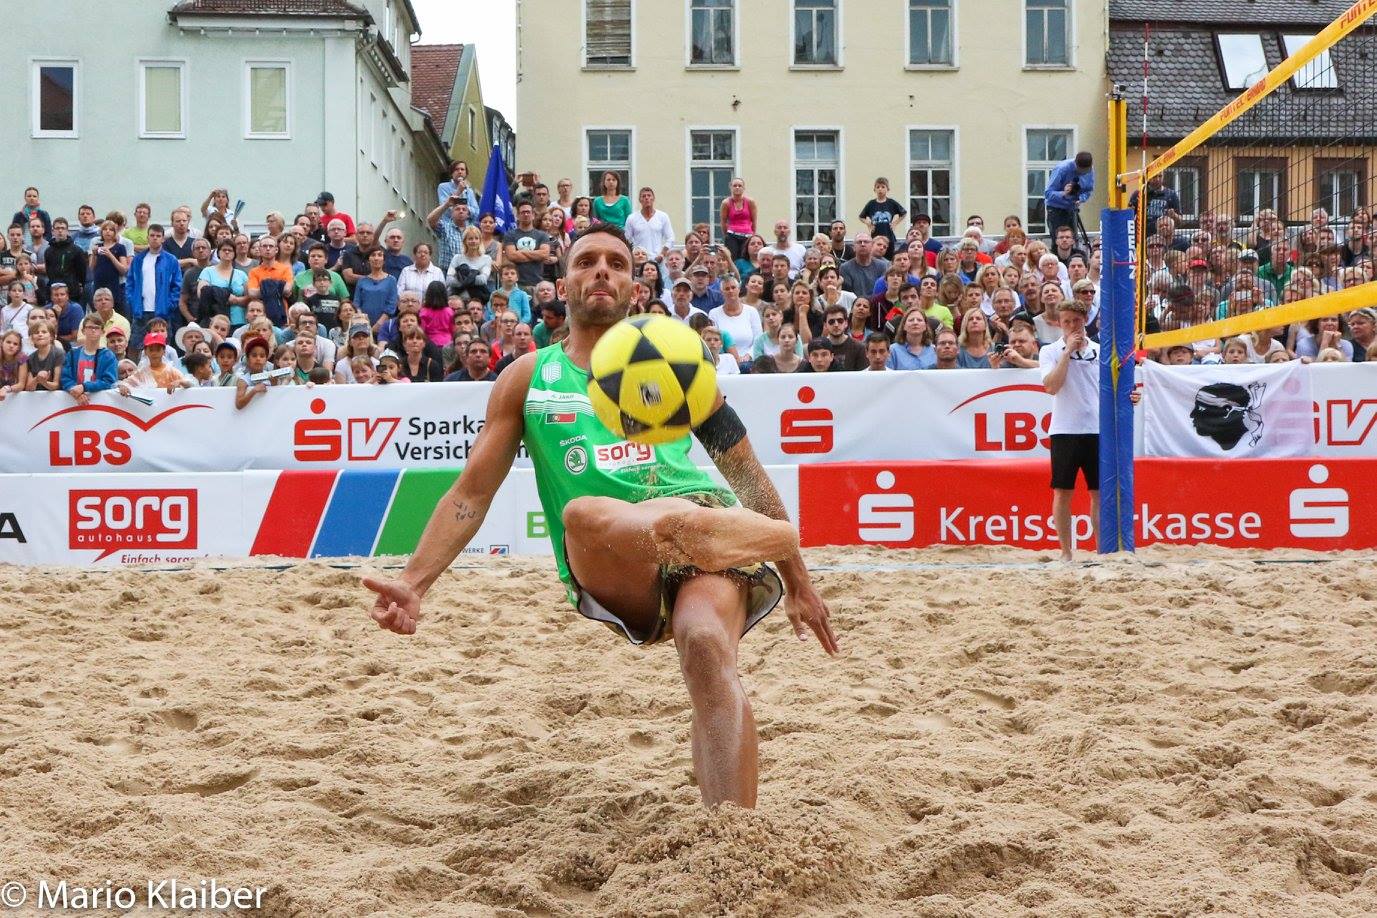 I European Footvolley Championship - Germany 2016 will feature the presence of two Portuguese teams